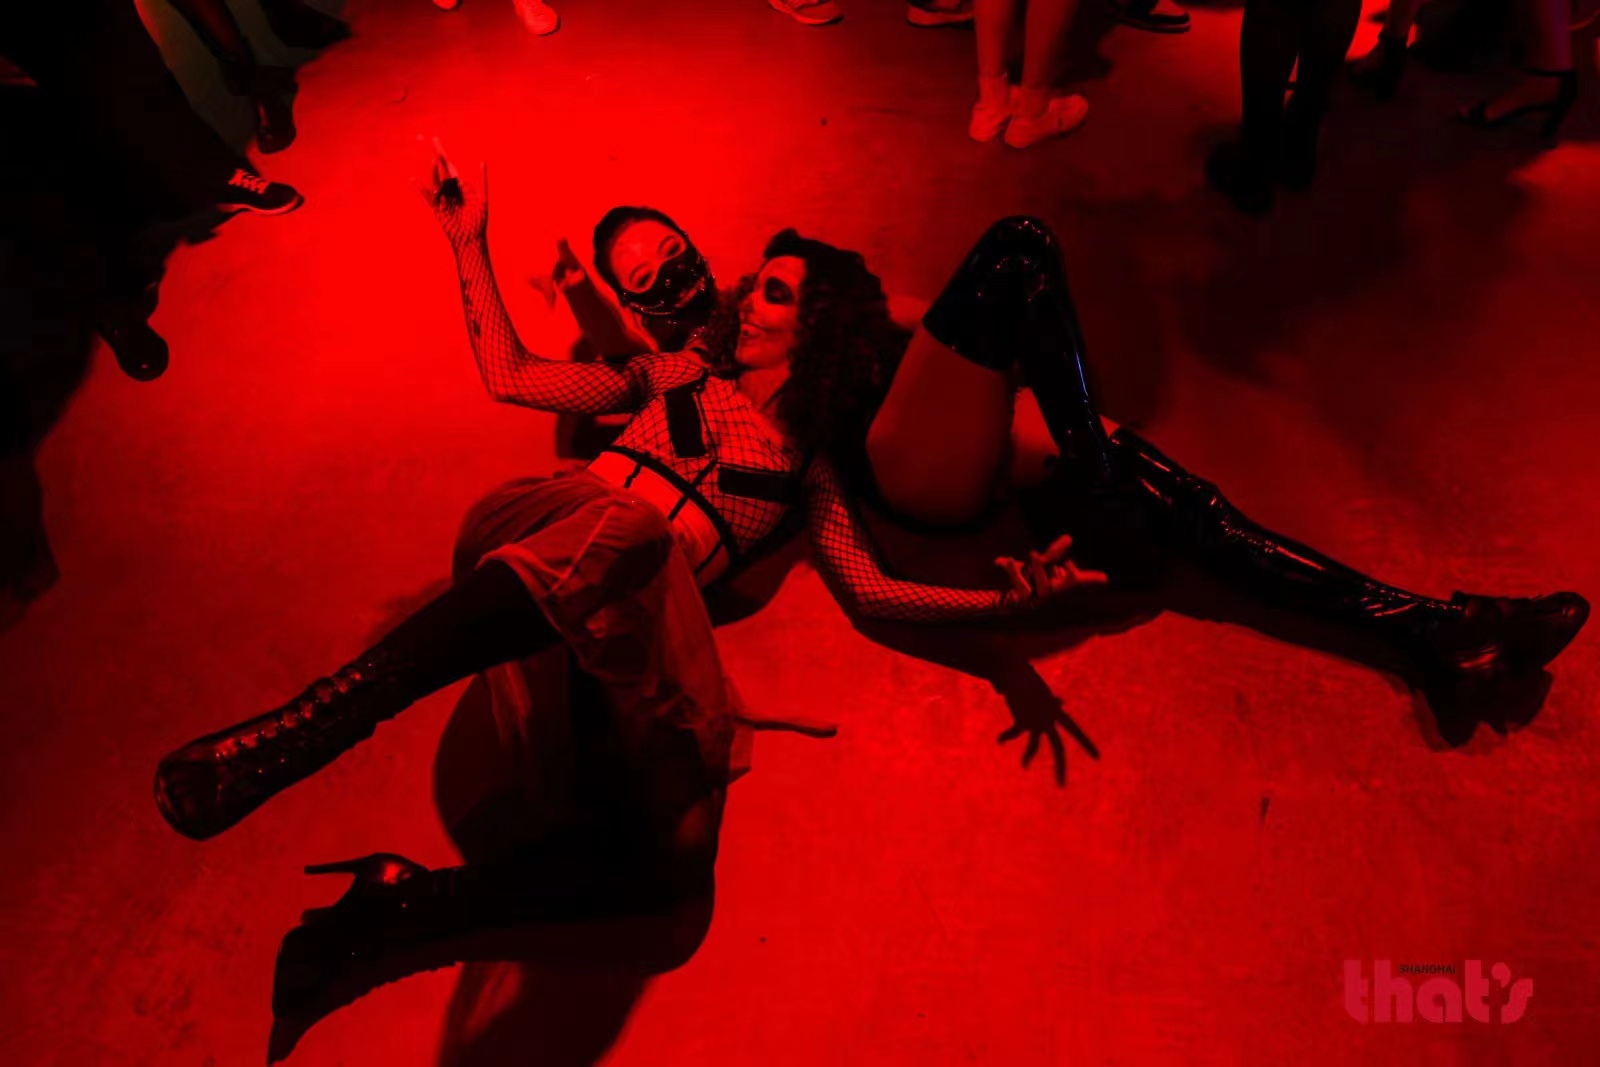 WATCH: That's Shanghai Halloween at Cages was a Hell of a Bash!